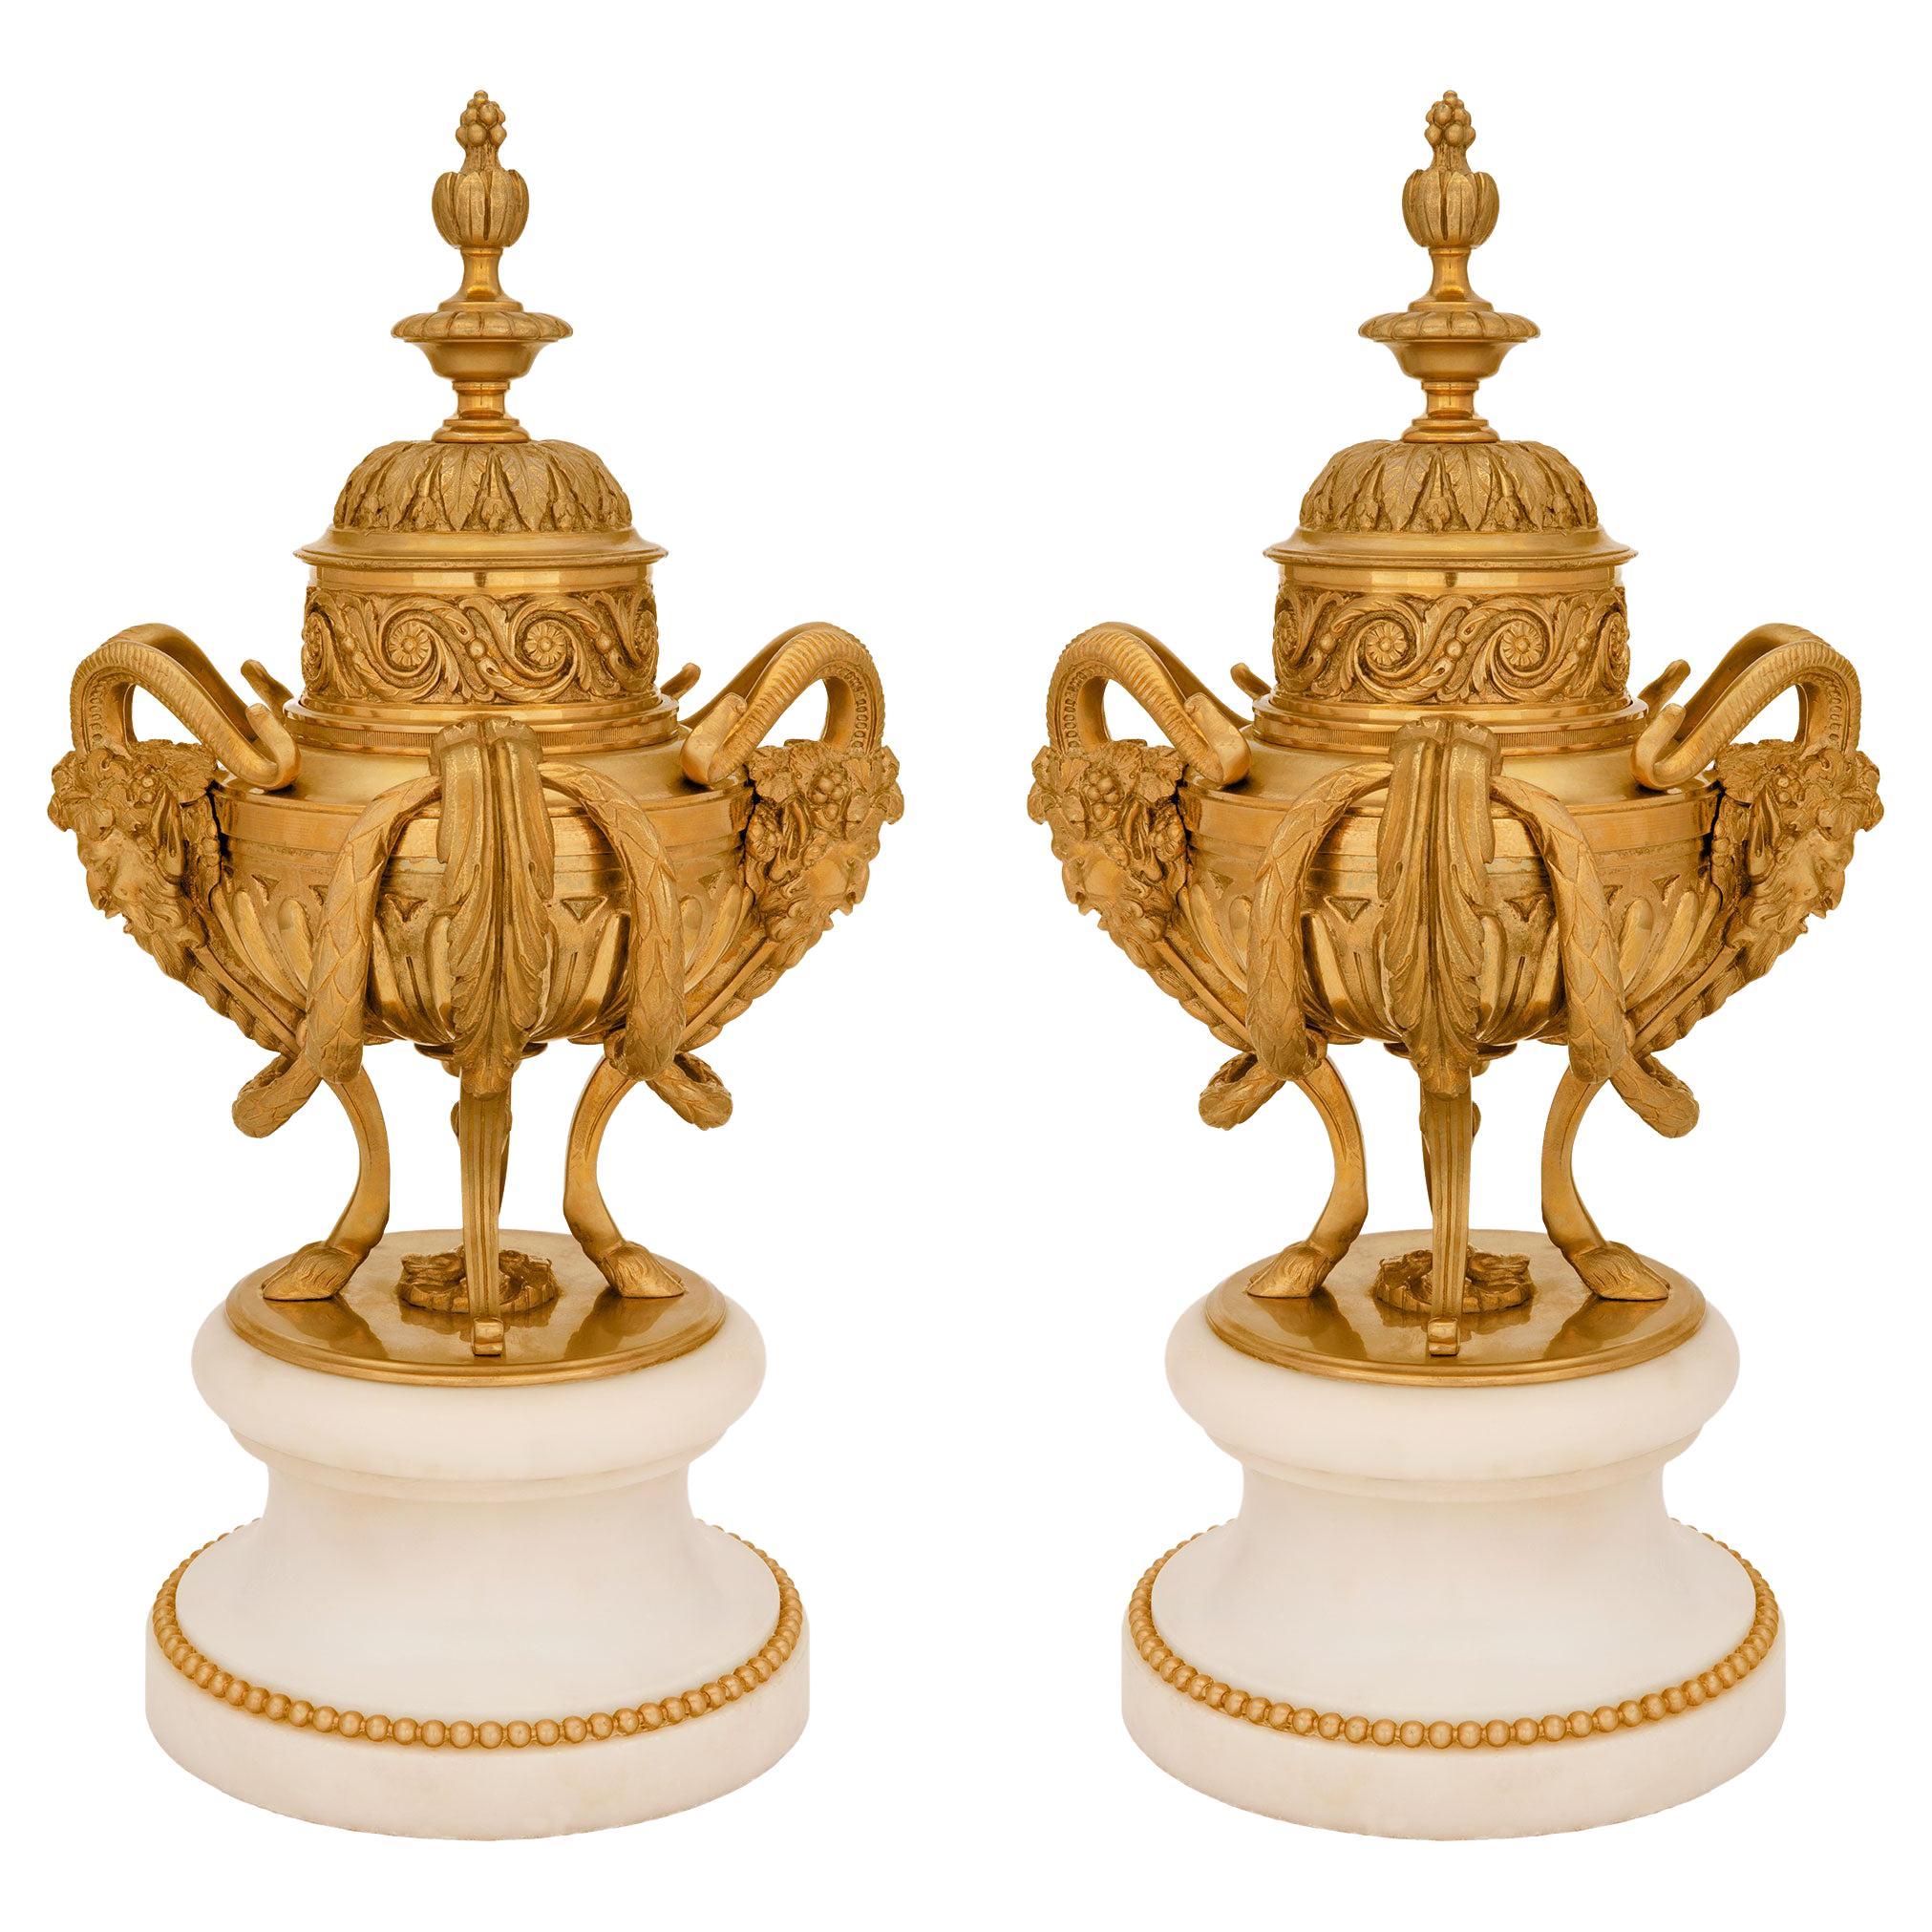 Pair of French 19th Century Louis XVI Style Ormolu and Marble Lidded Urns For Sale